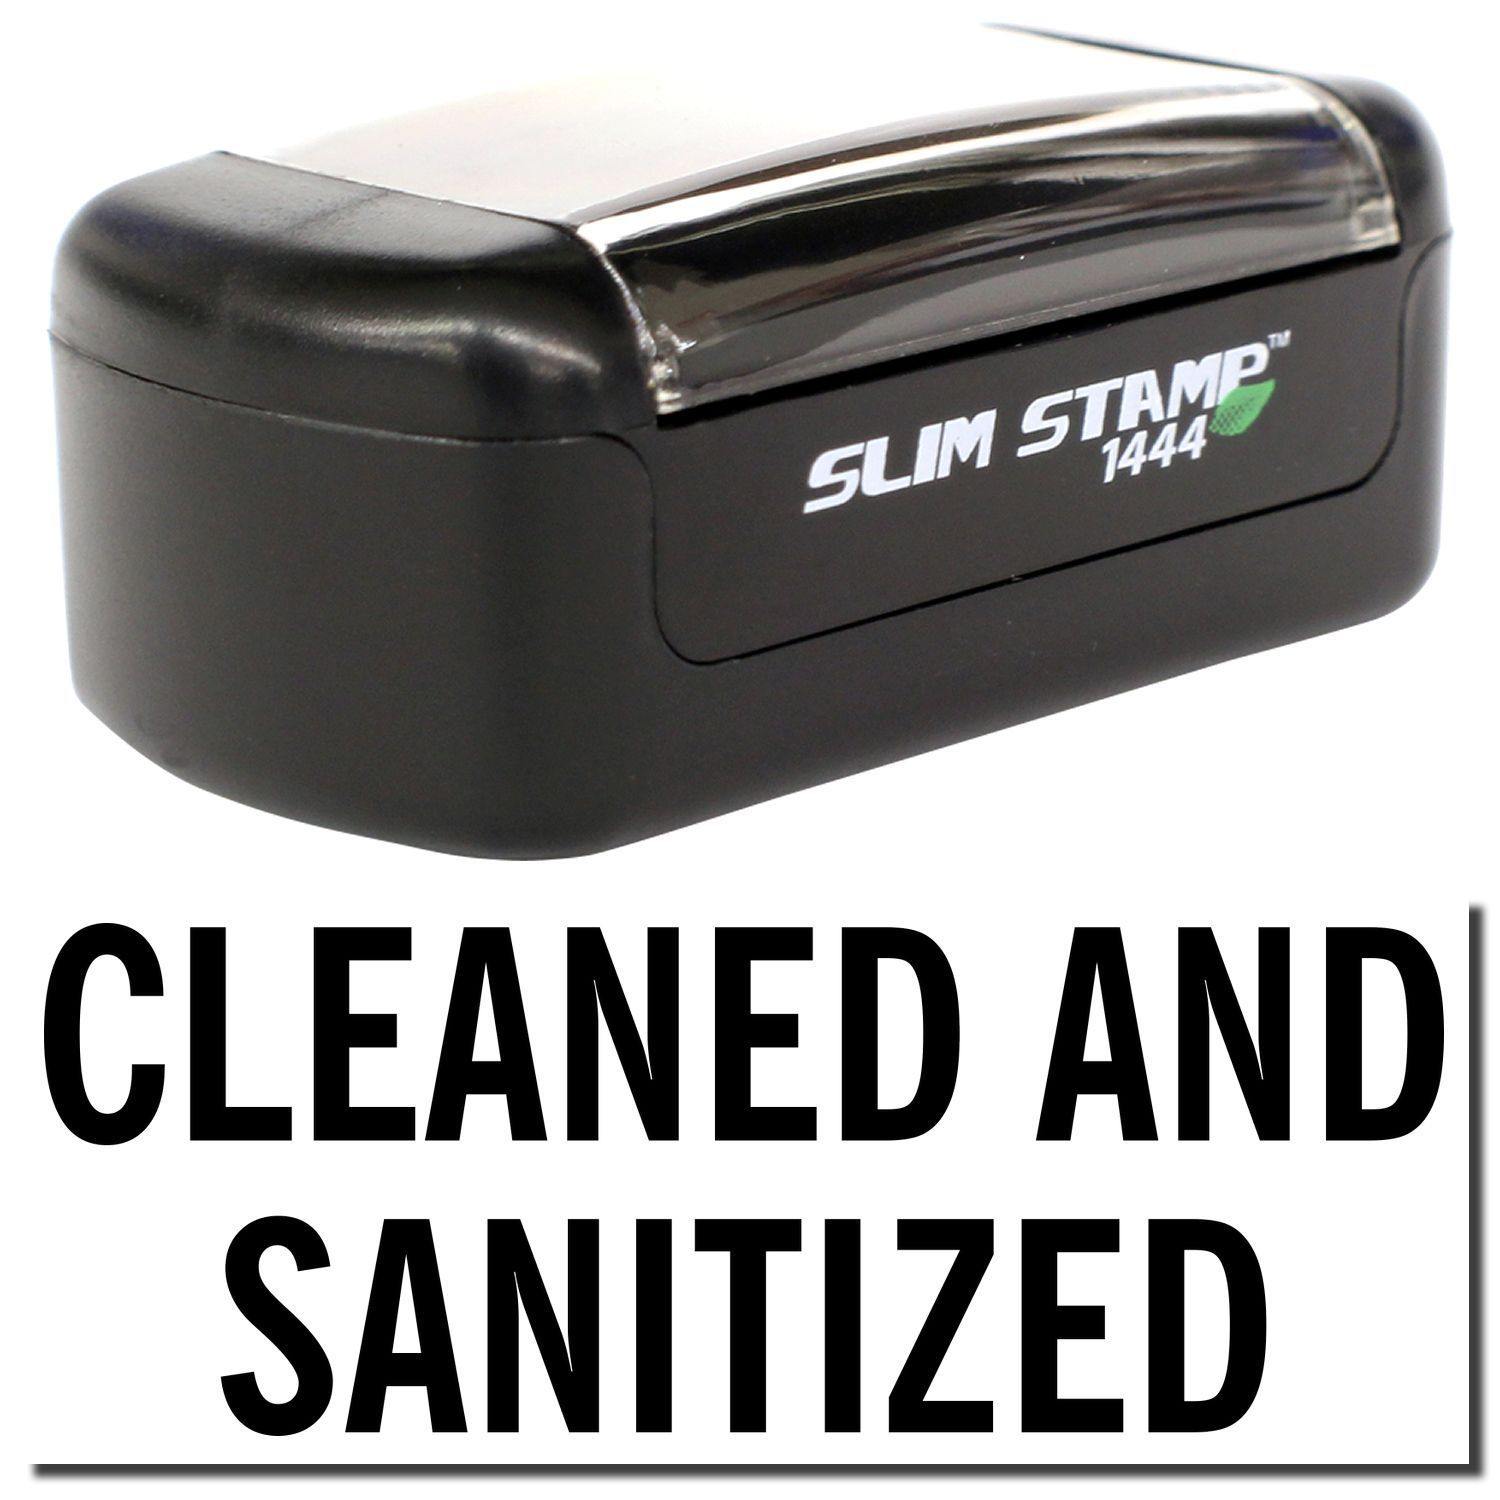 A stock office pre-inked stamp with a stamped image showing how the text "CLEANED AND SANITIZED" is displayed after stamping.